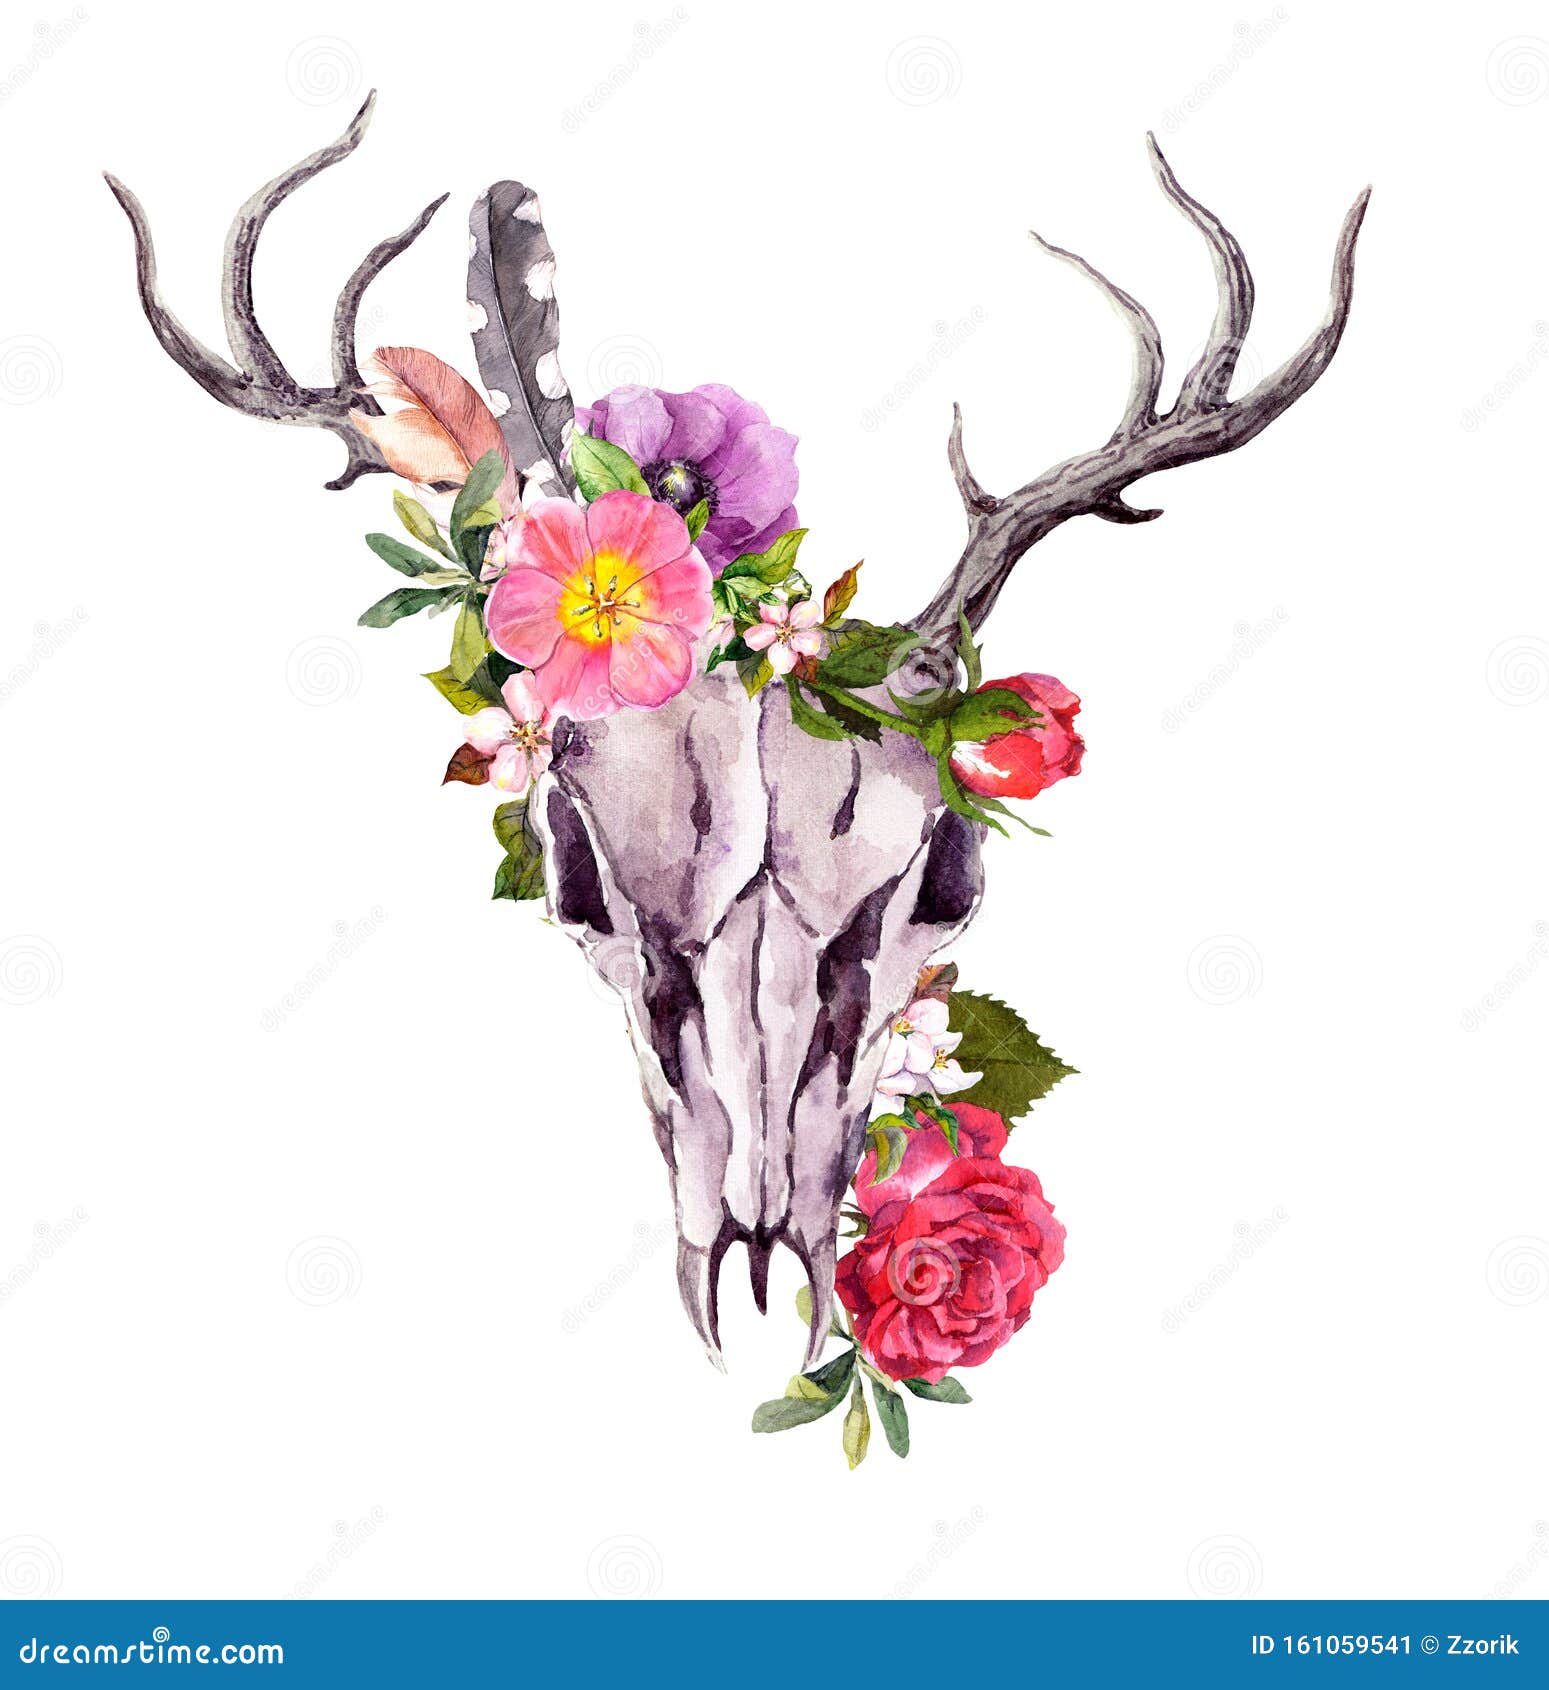 Deer Animal Skull with Flowers, Feathers. Watercolor Stock Illustration